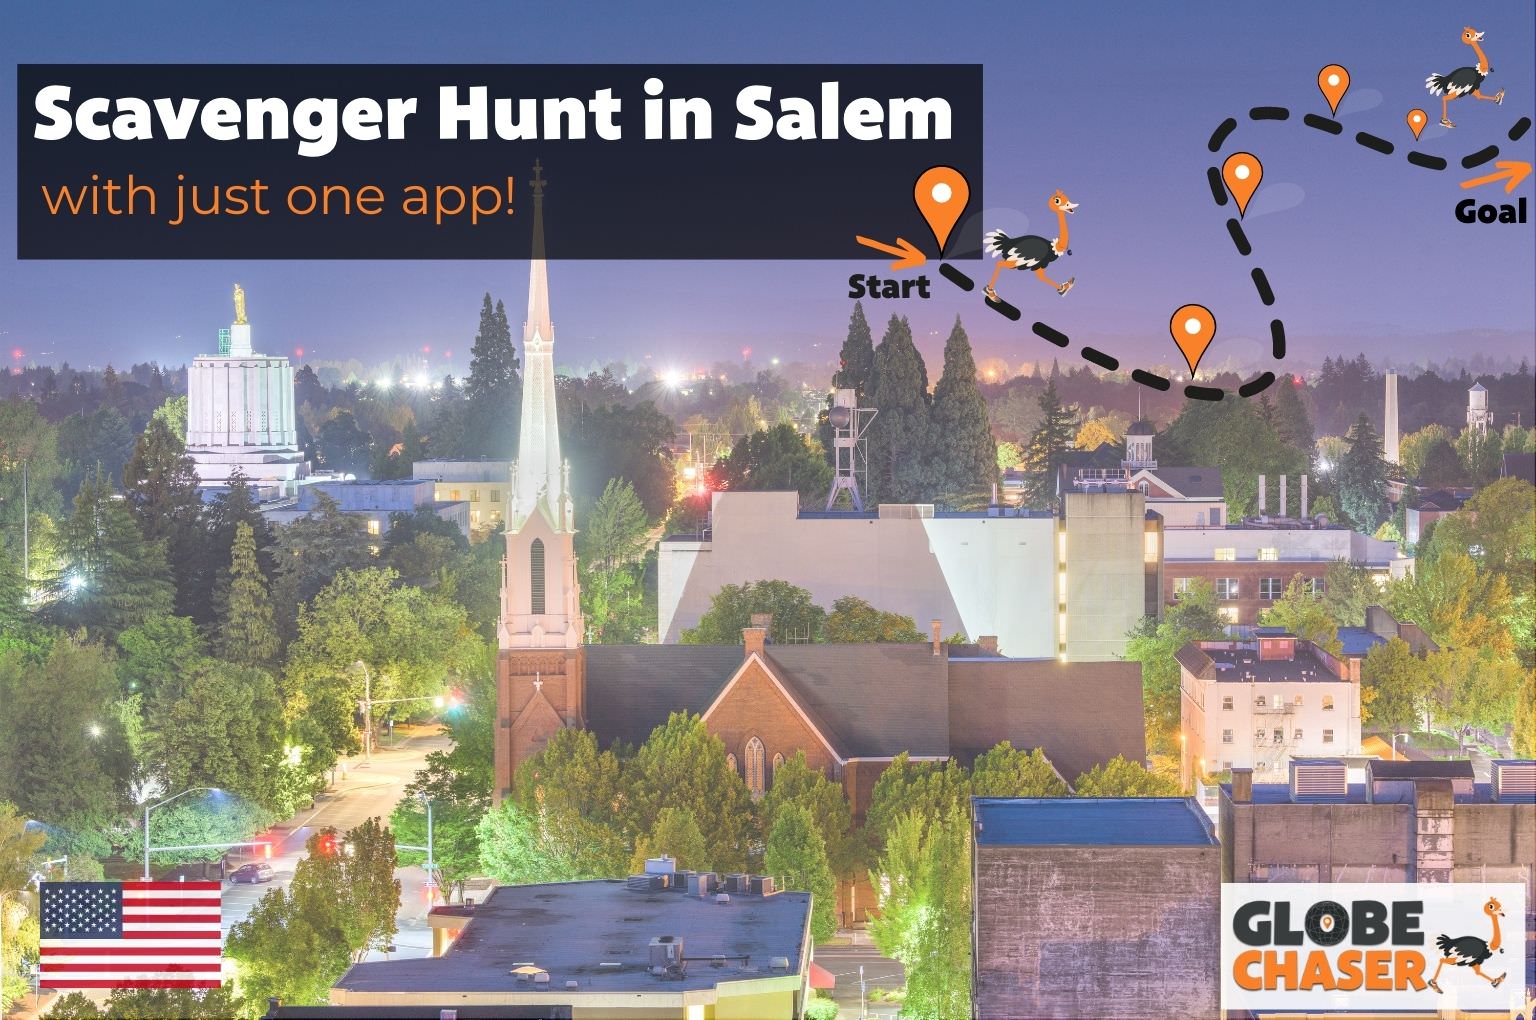 Scavenger Hunt in Salem, USA - Family Activities with the Globe Chaser App for Outdoor Fun